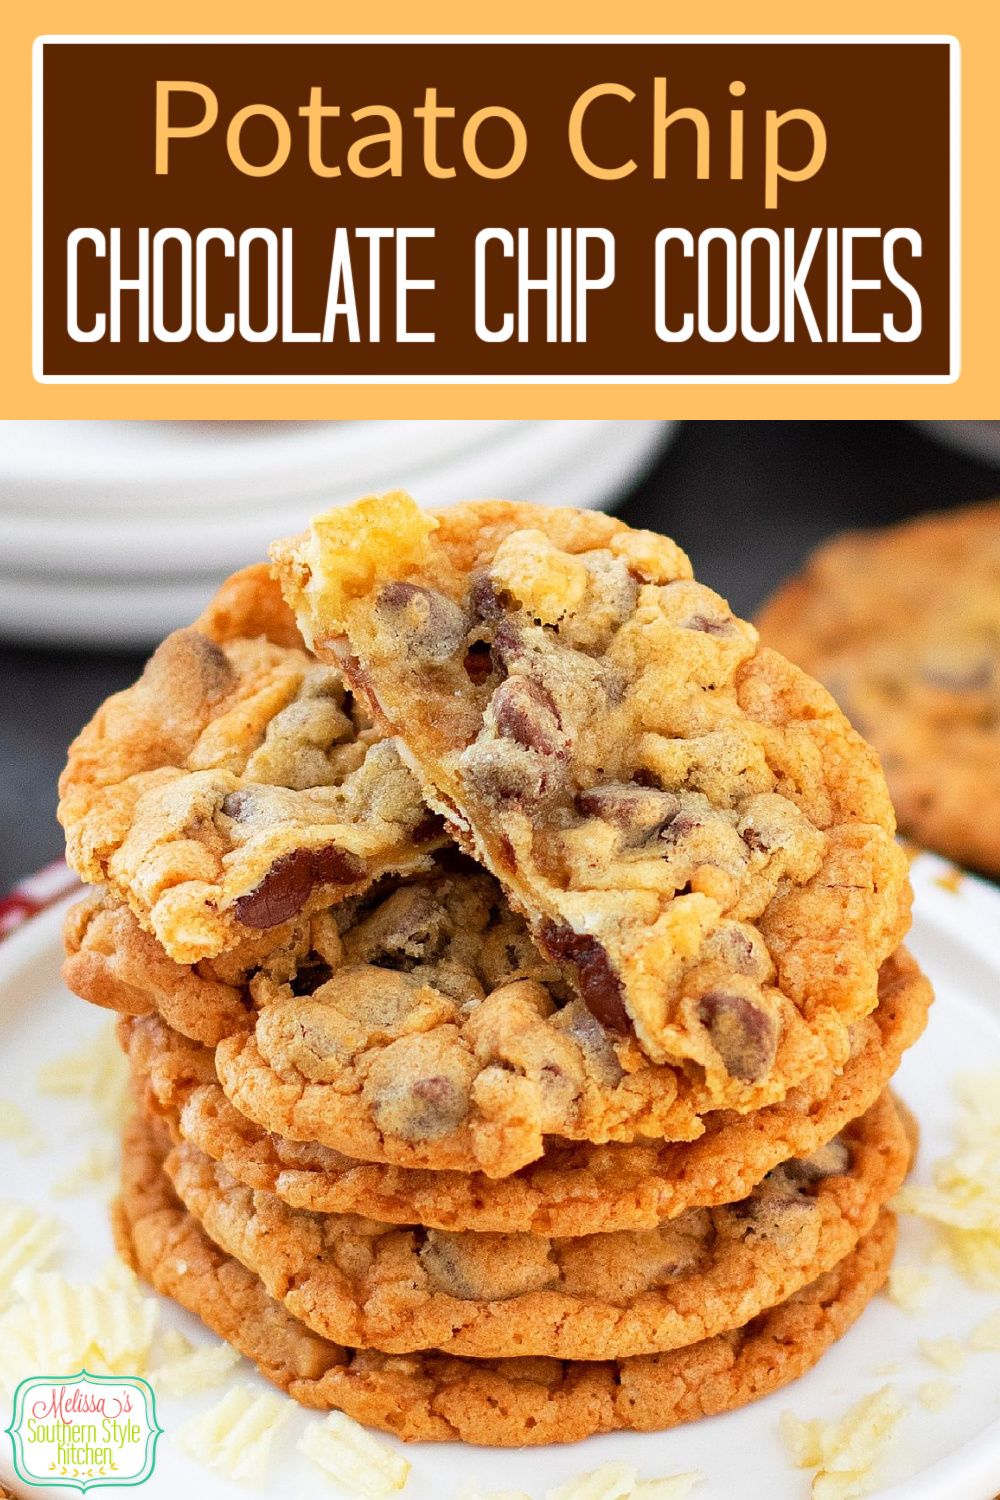 These Potato Chip Chocolate Chip Cookies feature that sweet and salty flavor combination that makes them impossible to resist! #potatochipcookies #cookierecipes #chocolatechipcookies #cookierecipes #christmascookies via @melissasssk